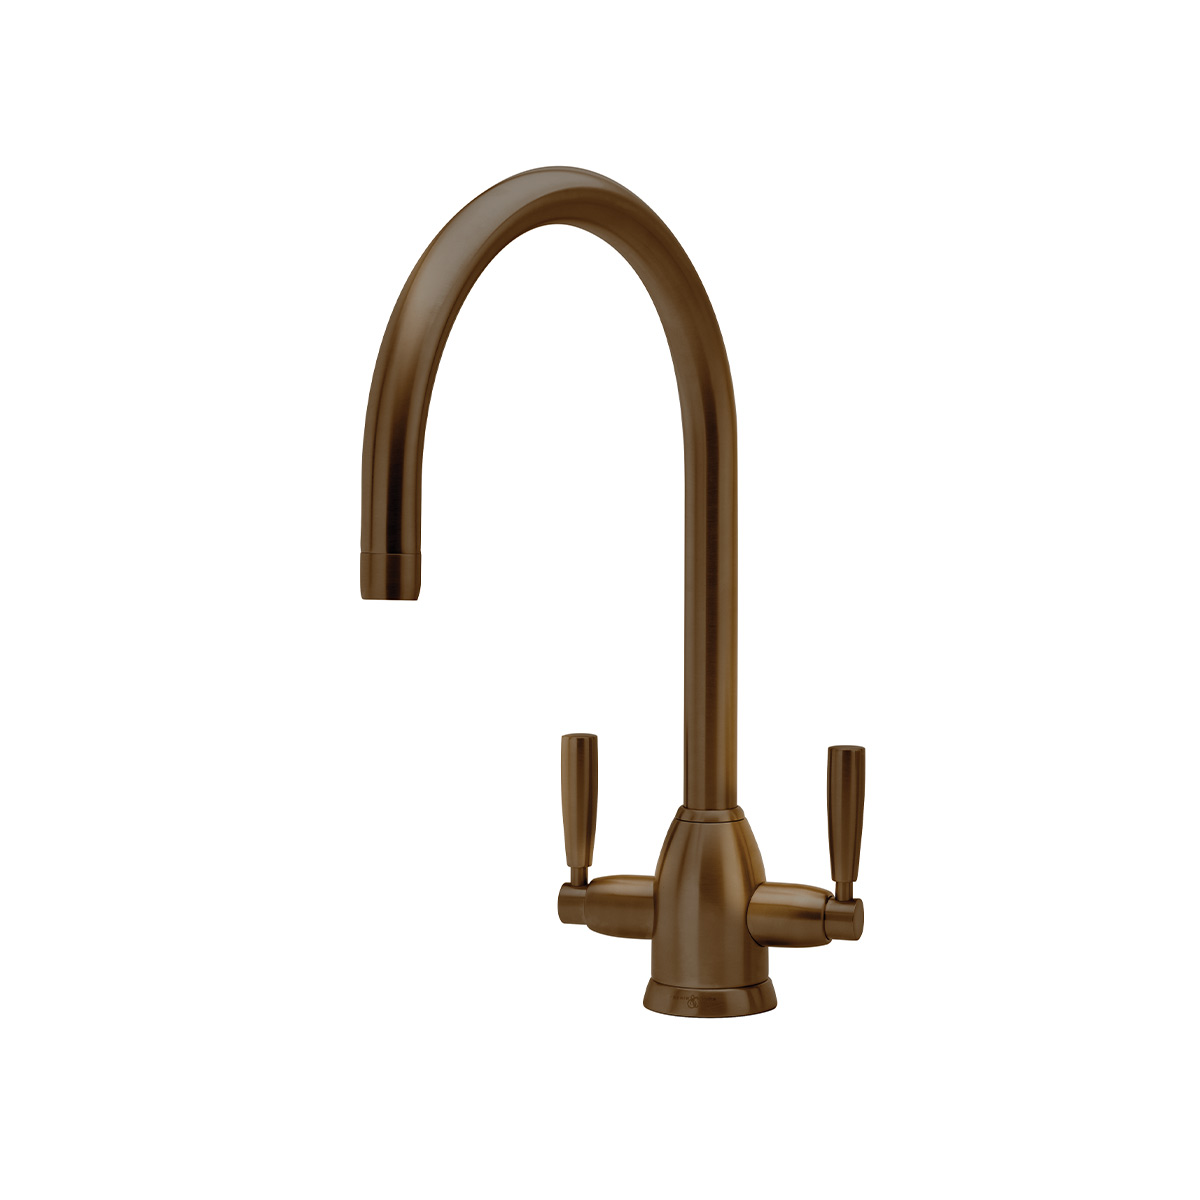 Shaws by Perrin & Rowe Silverdale kitchen mixer in English Bronze. Oberon style kitchen mixer AUSH.4861. Distributed in Australia by Luxe by Design, Brisbane.